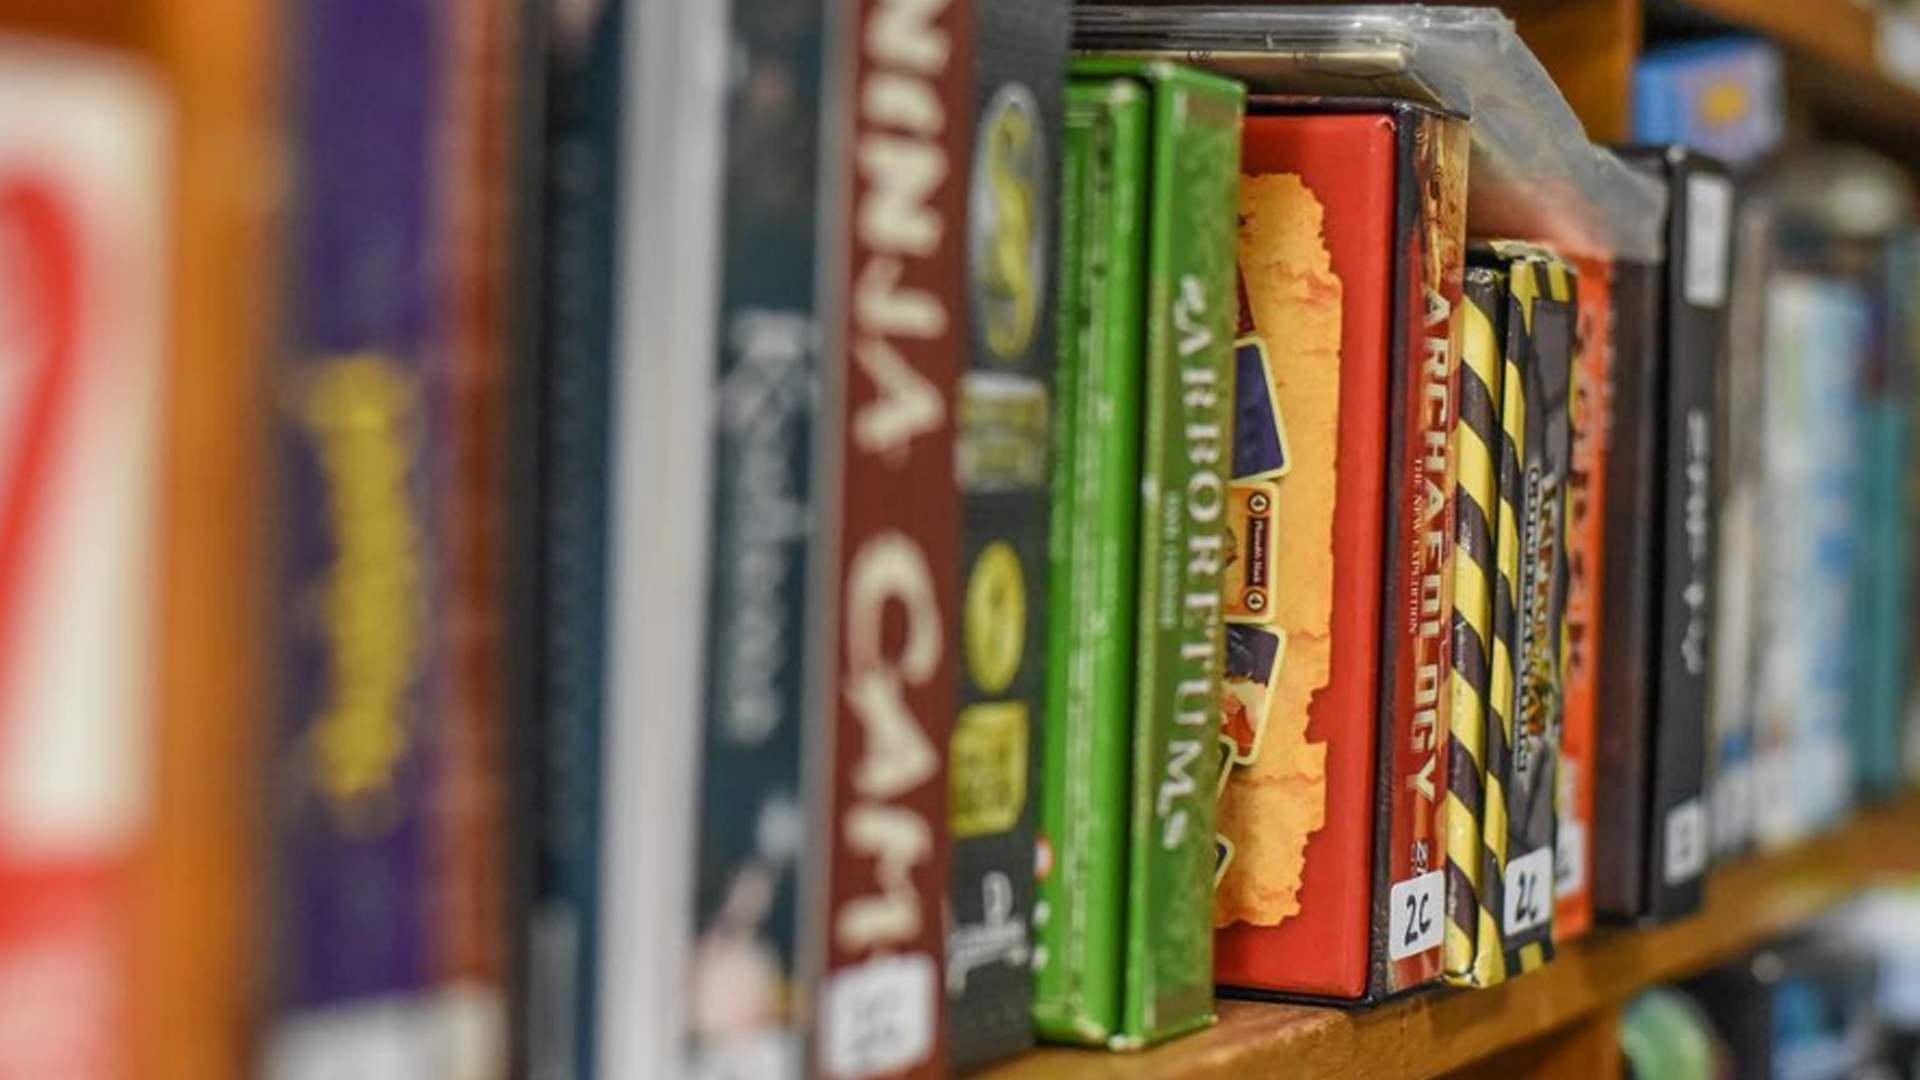 A close-up image of the board game collection in Thirsty Meeples in Oxford